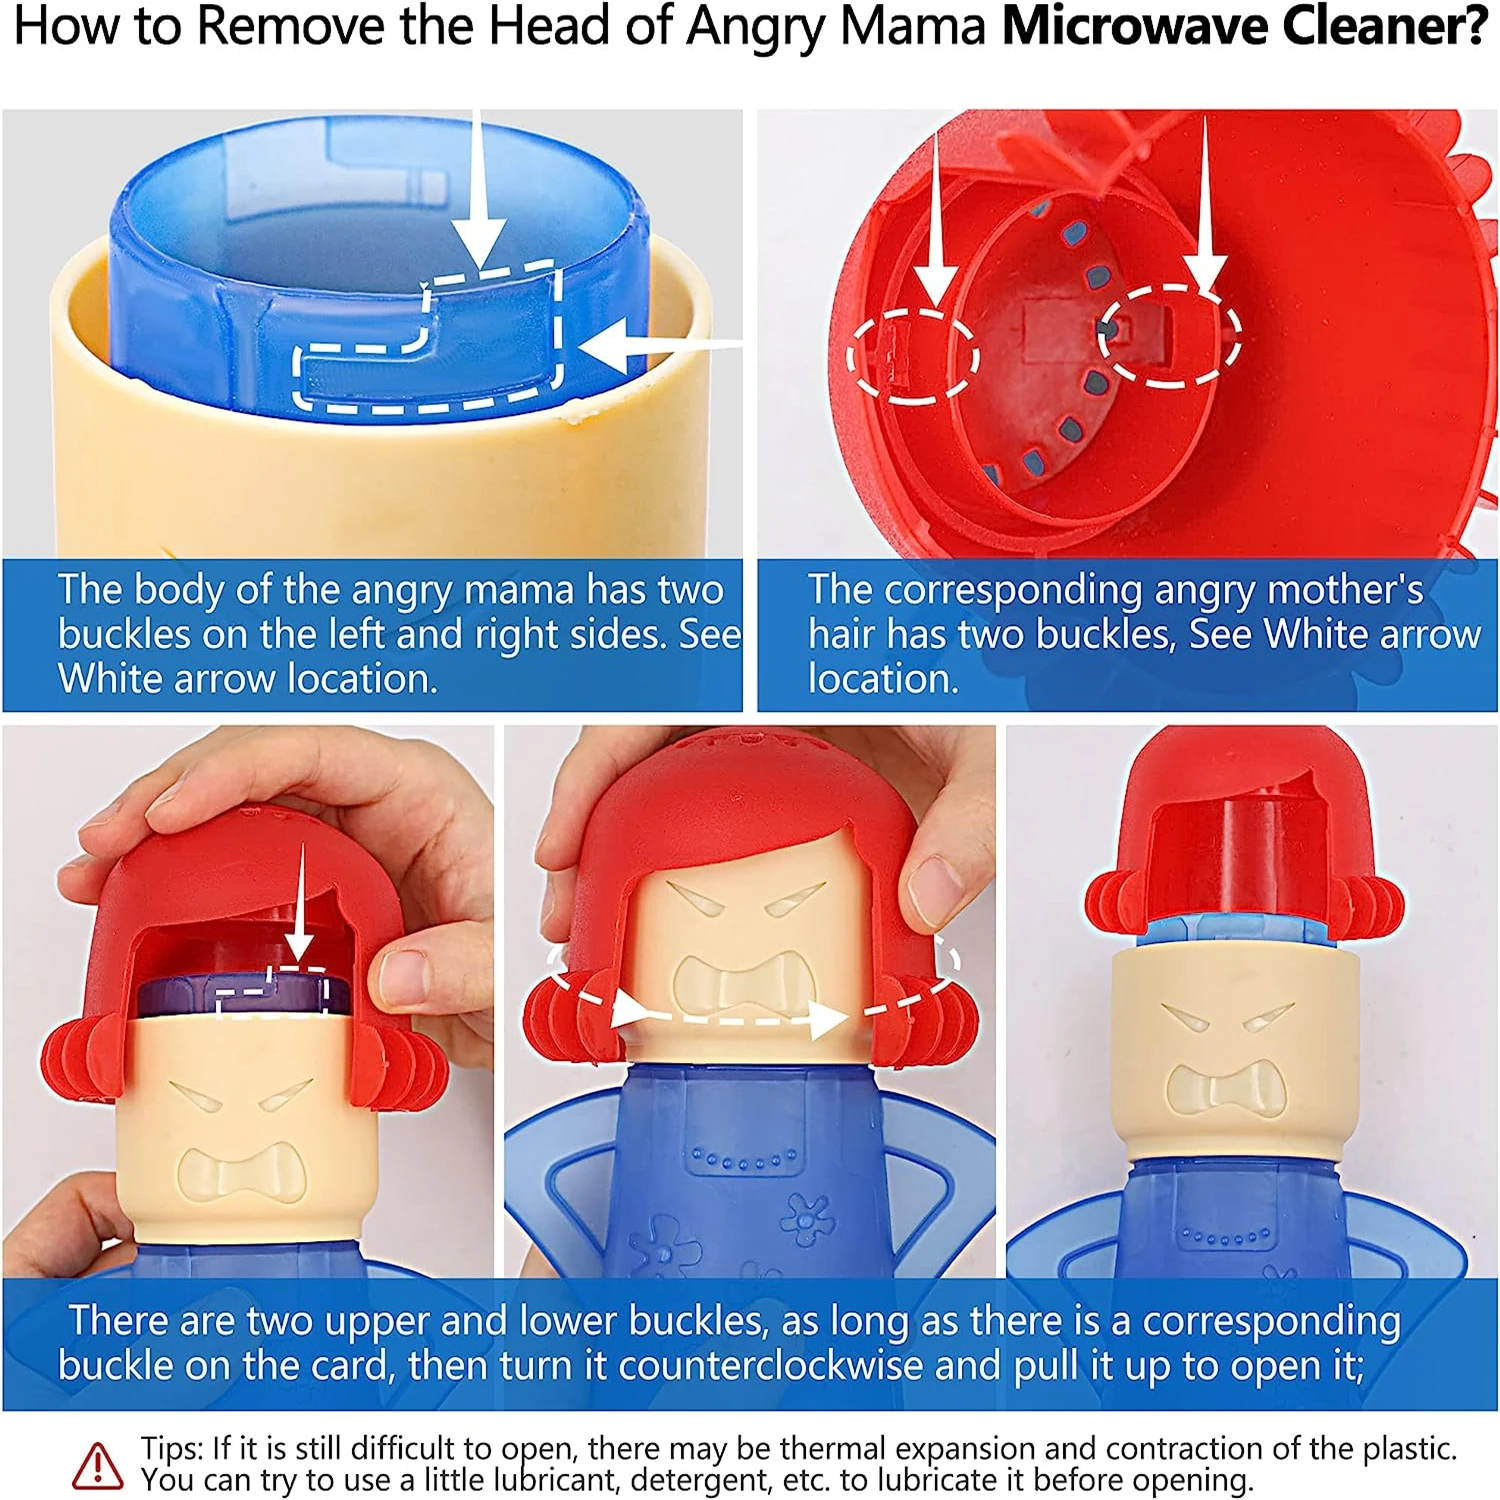 https://ae01.alicdn.com/kf/Sa449021dc63348f89b4b595a7efe09f82/1Pc-Angry-Mama-Microwave-Cleaner-Angry-Mom-Microwave-Oven-Steam-Cleaner-Steamer-Cleaning-Equipment-Disinfects-With.jpg